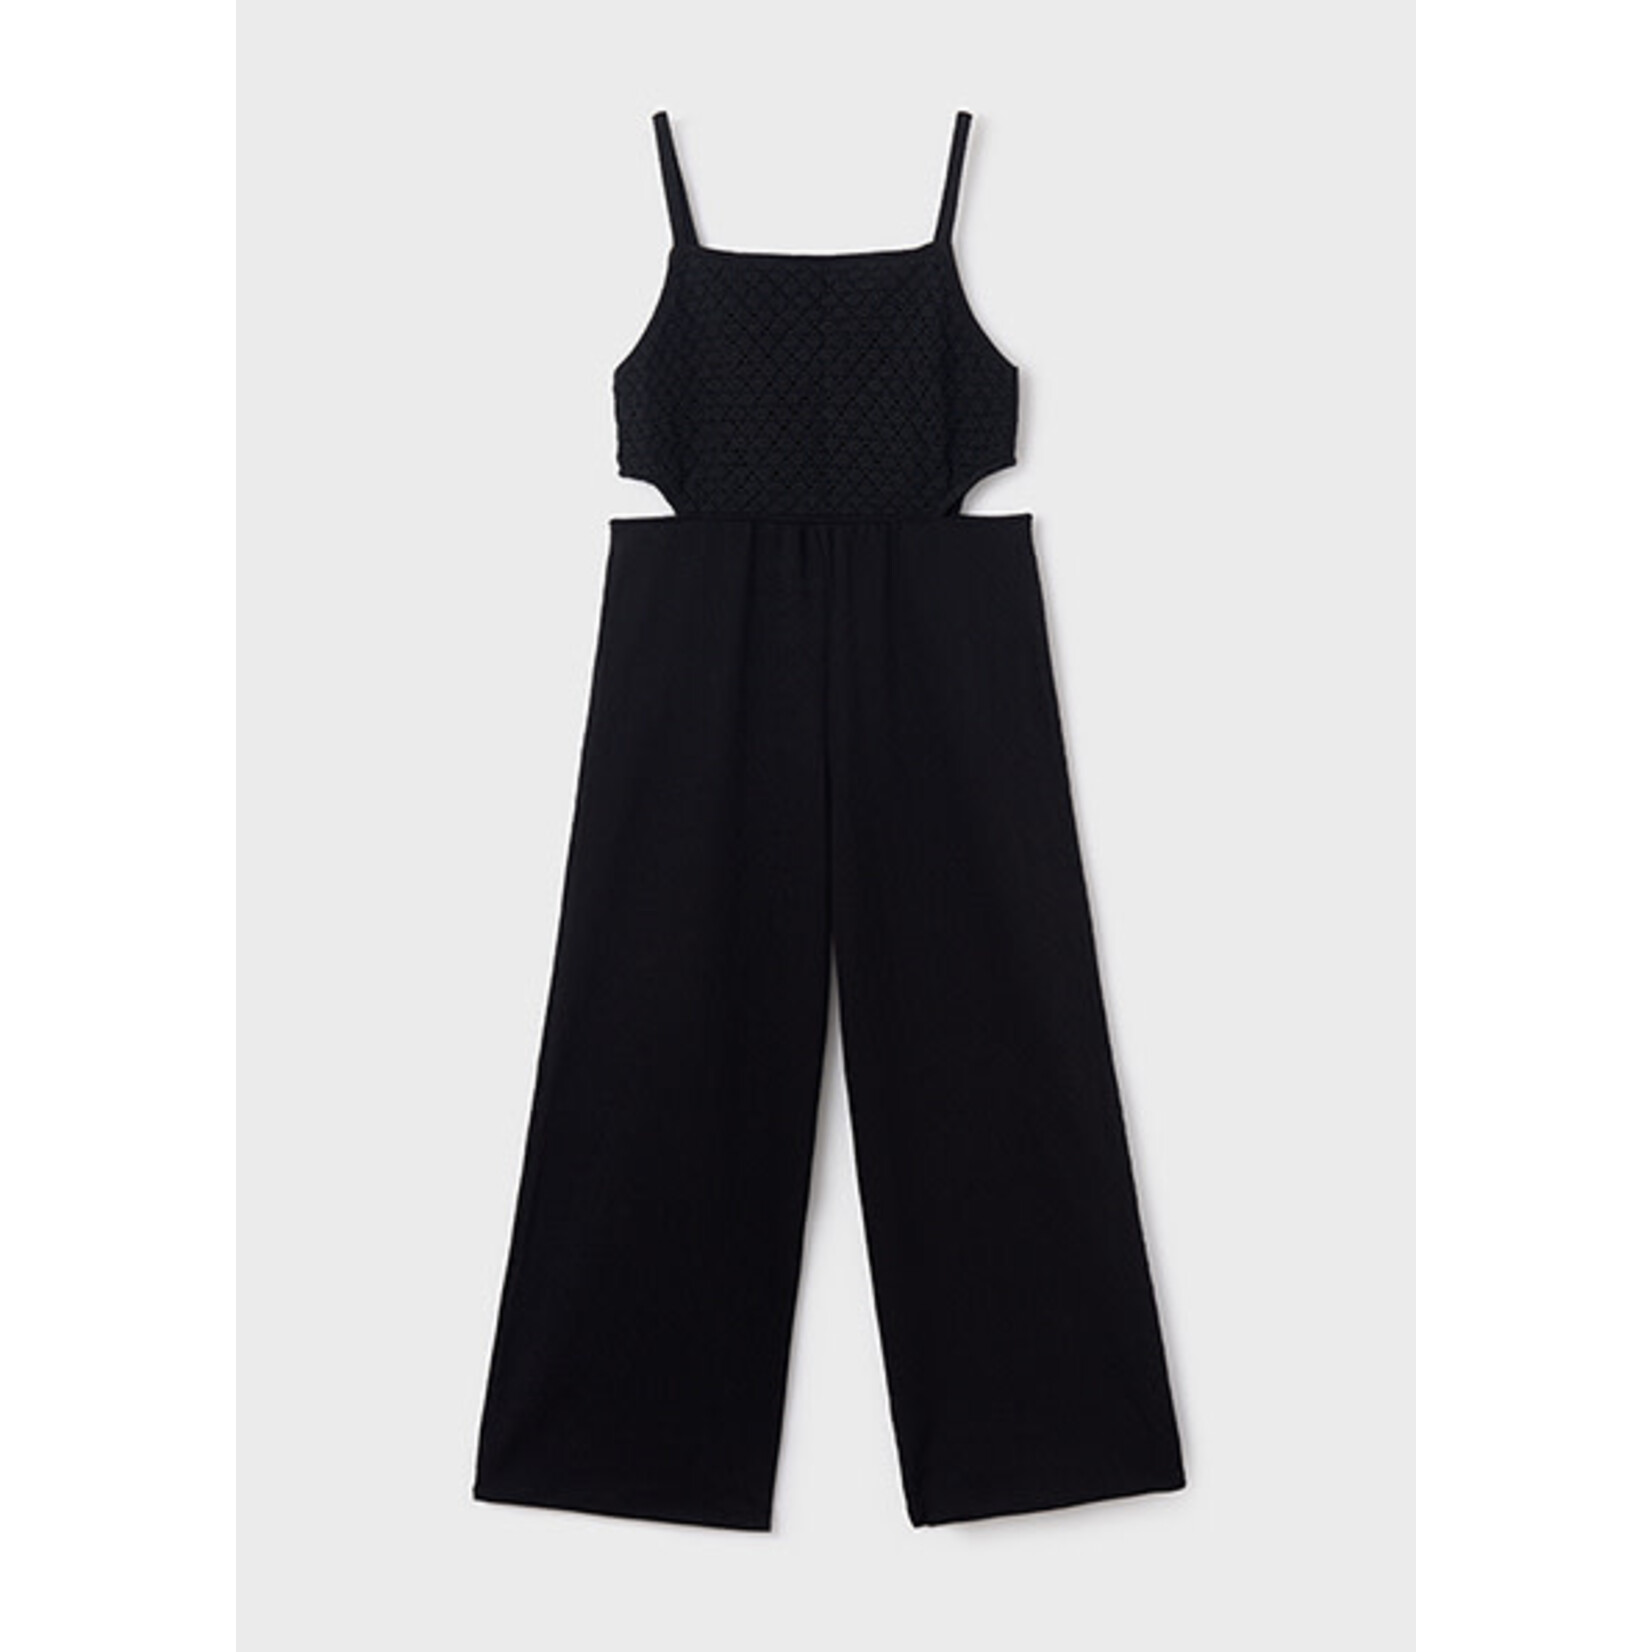 MAYORAL TWEEN GIRLS CUT OUT JUMPSUIT